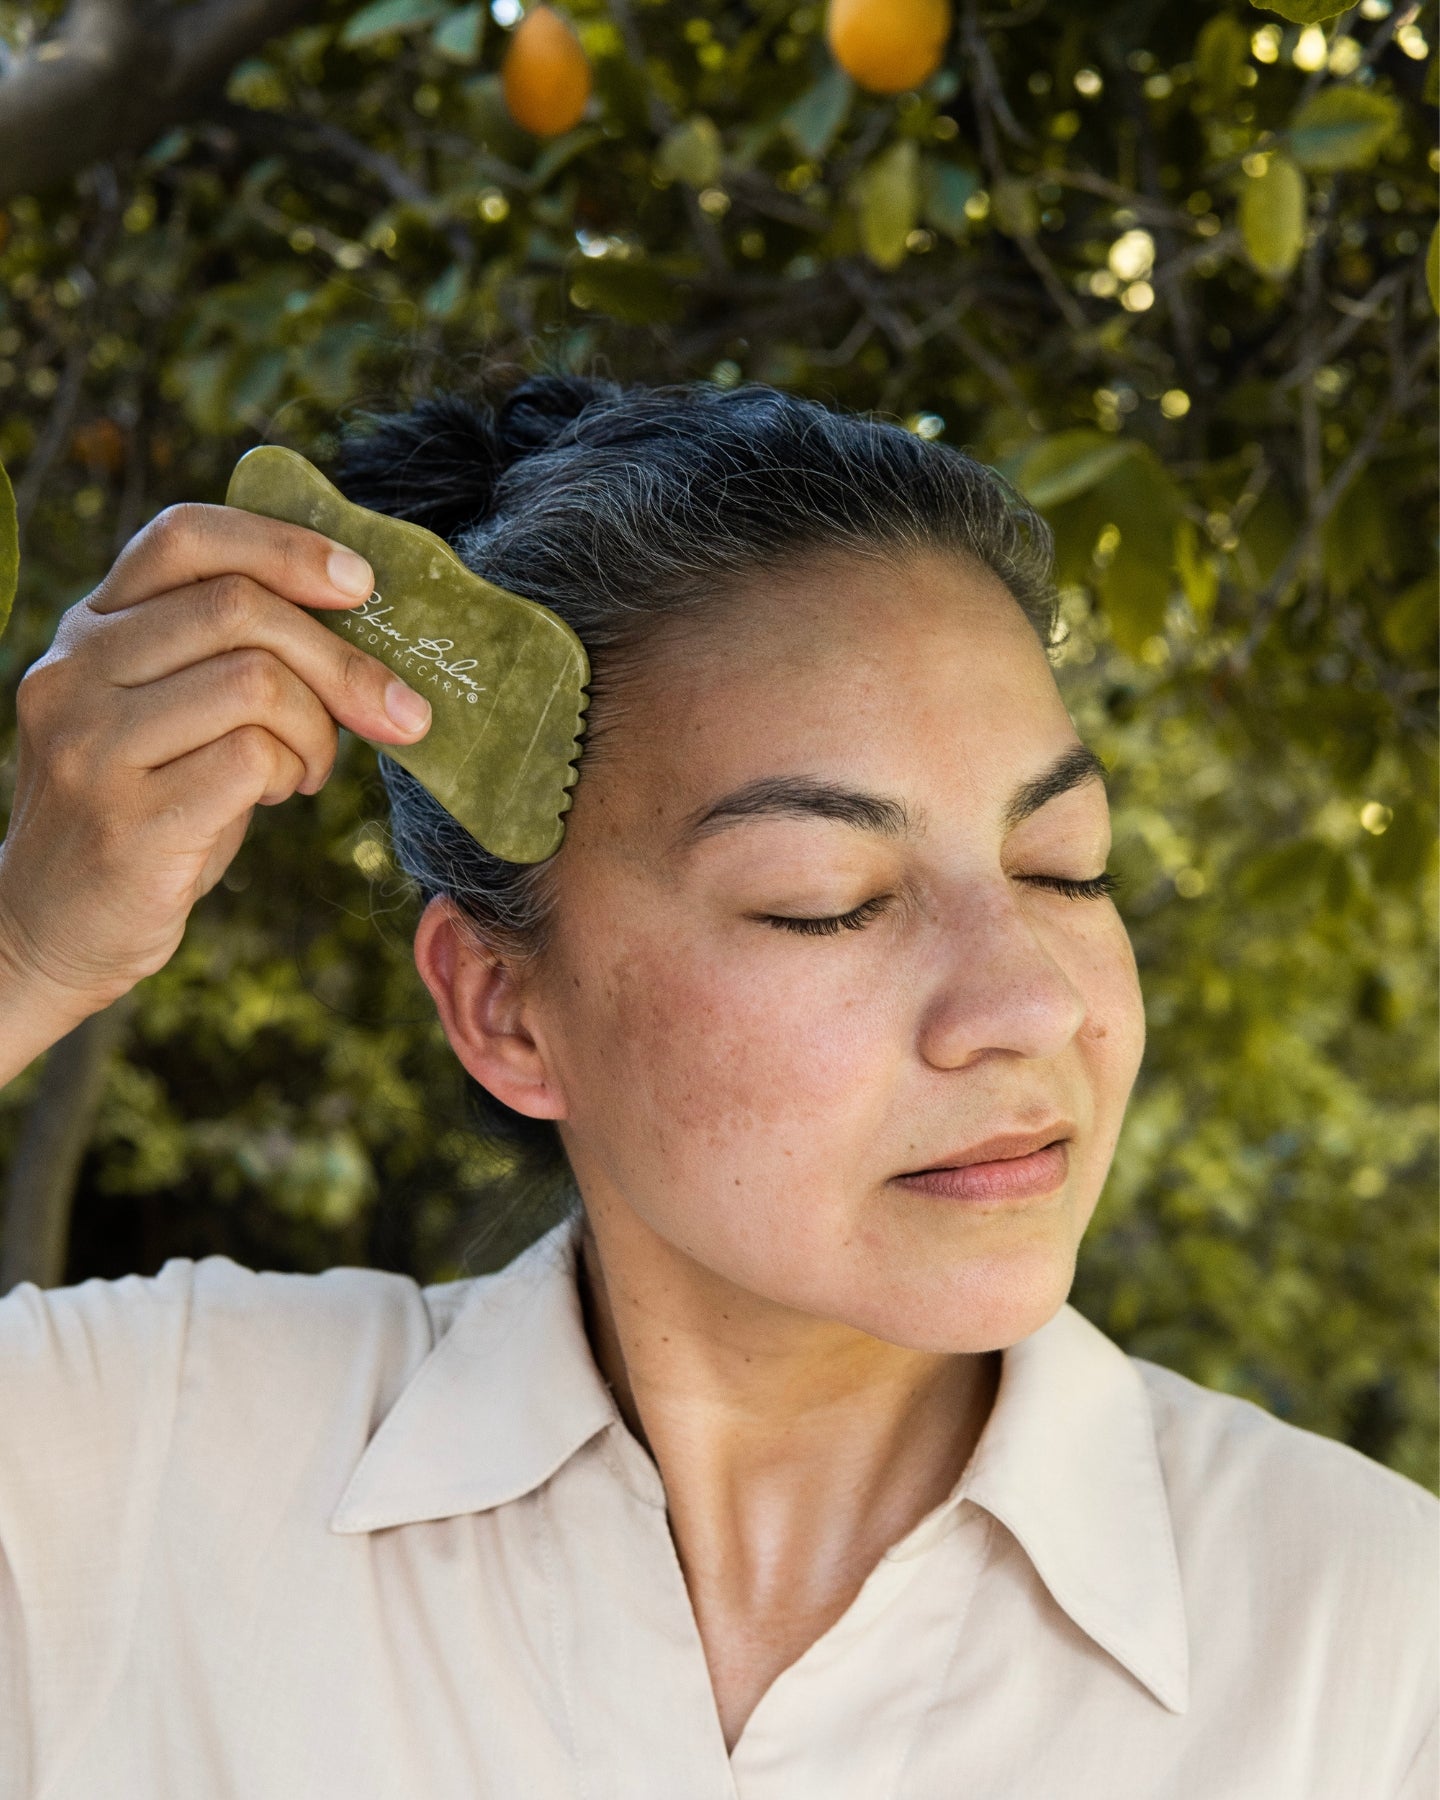 A woman uses the Jade Facial Stone on her face.